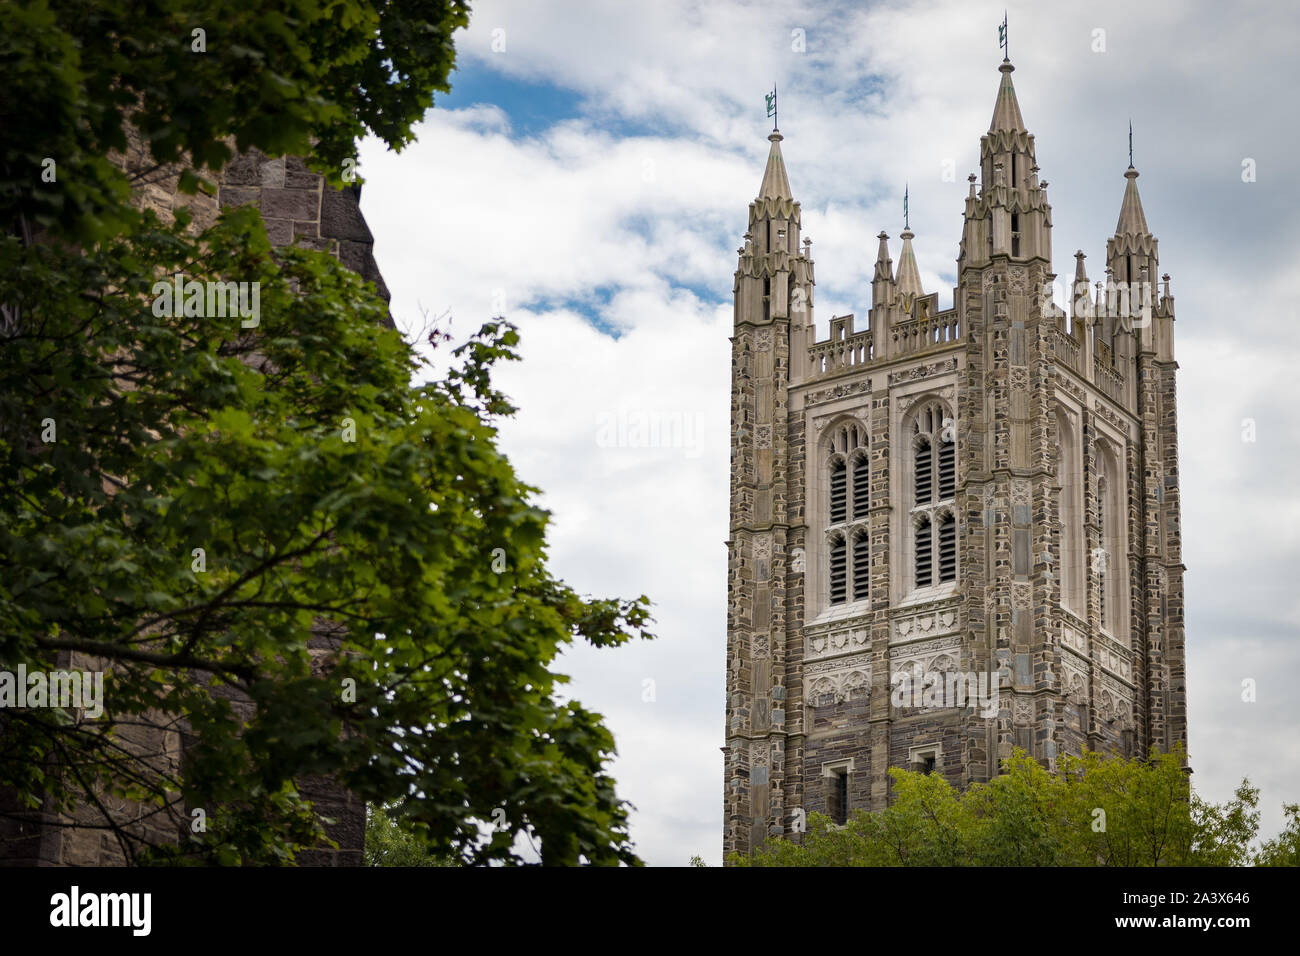 Cleveland Tower, Princeton University; ivy and greenery in foreground Stock Photo